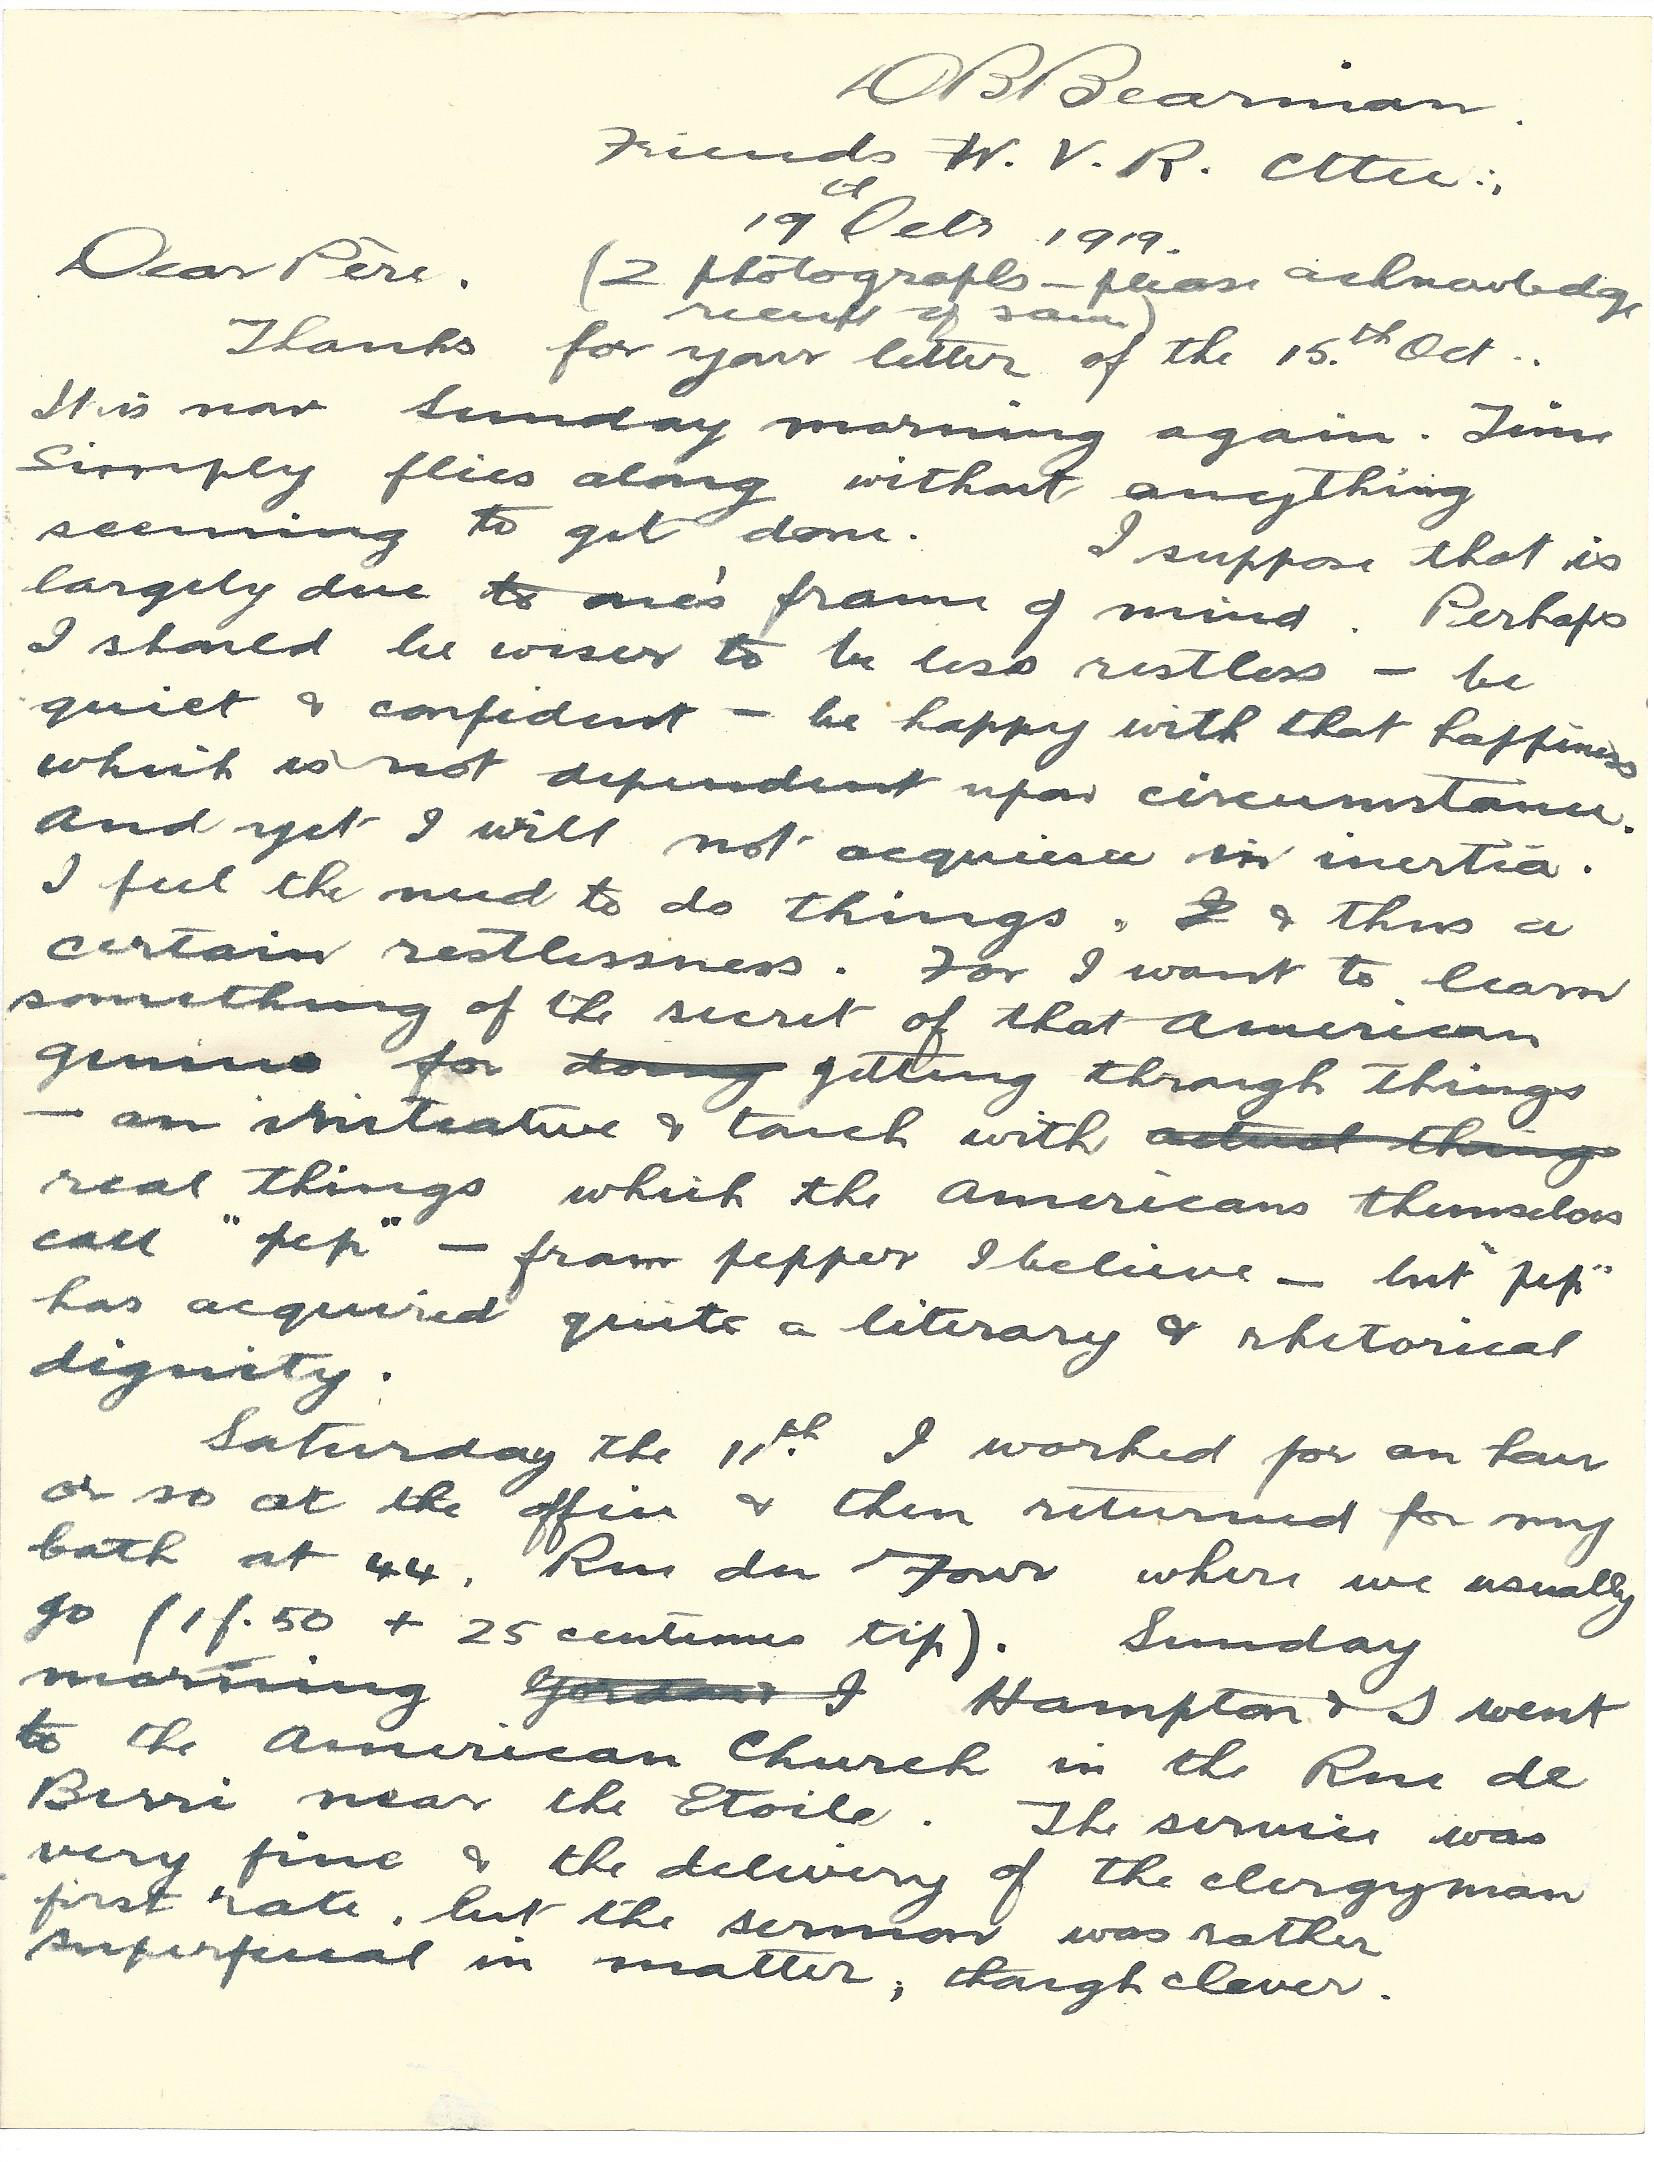 1919-10-19 Page 1 letter by Donald Bearman